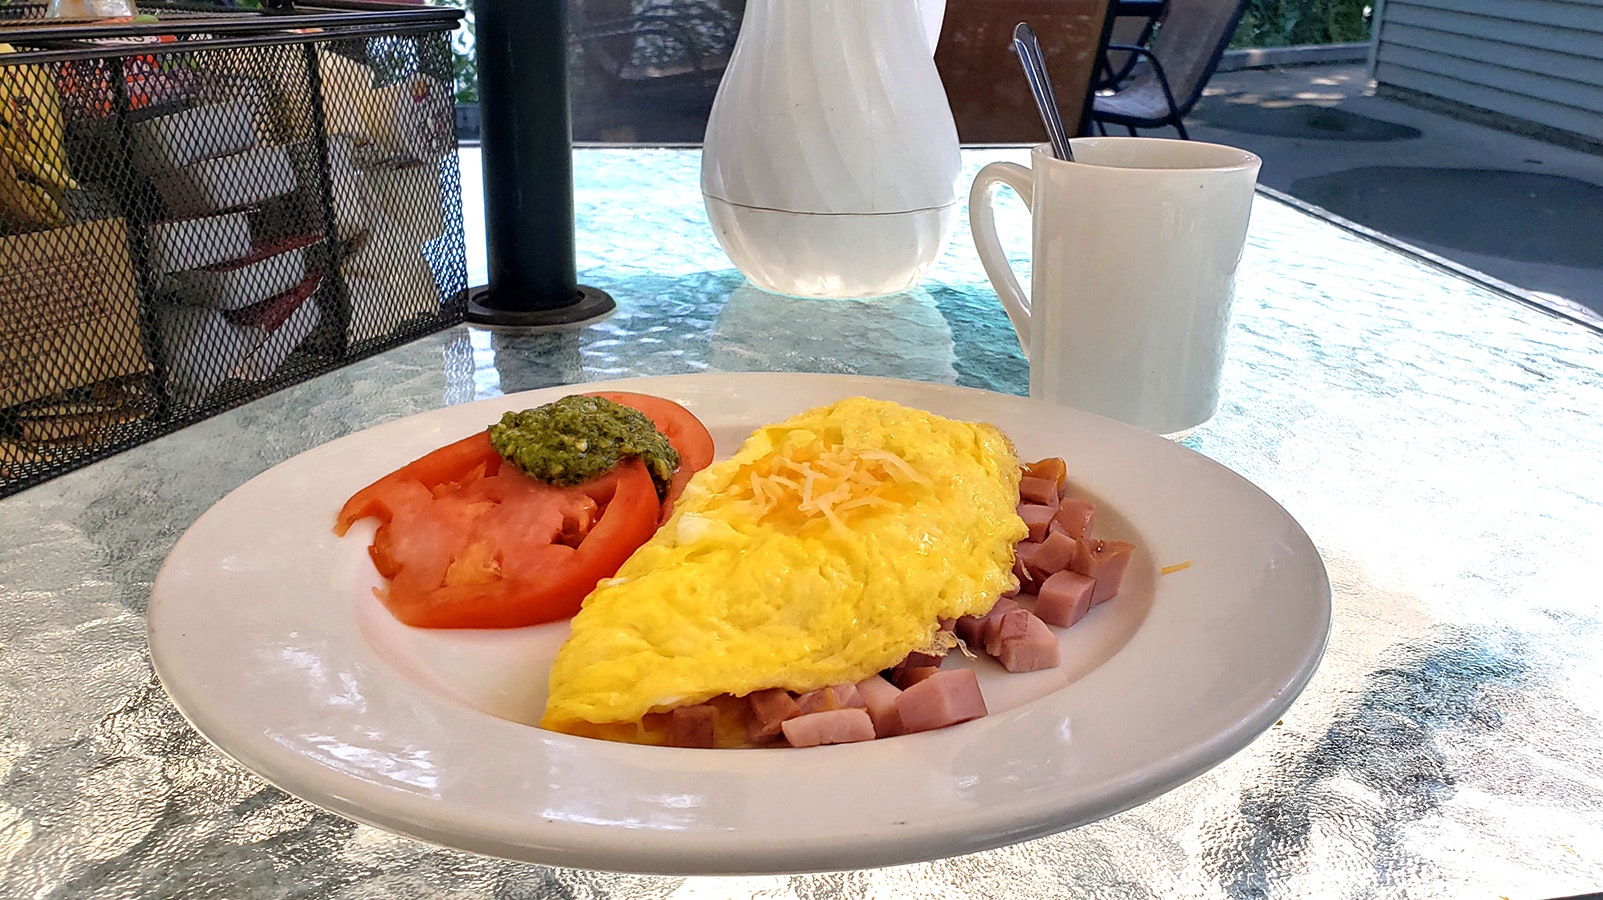 A ham, egg and cheese omelet with a side of tomatoes and basil and coffee at J.W. Hugus Restaurant & Catering.